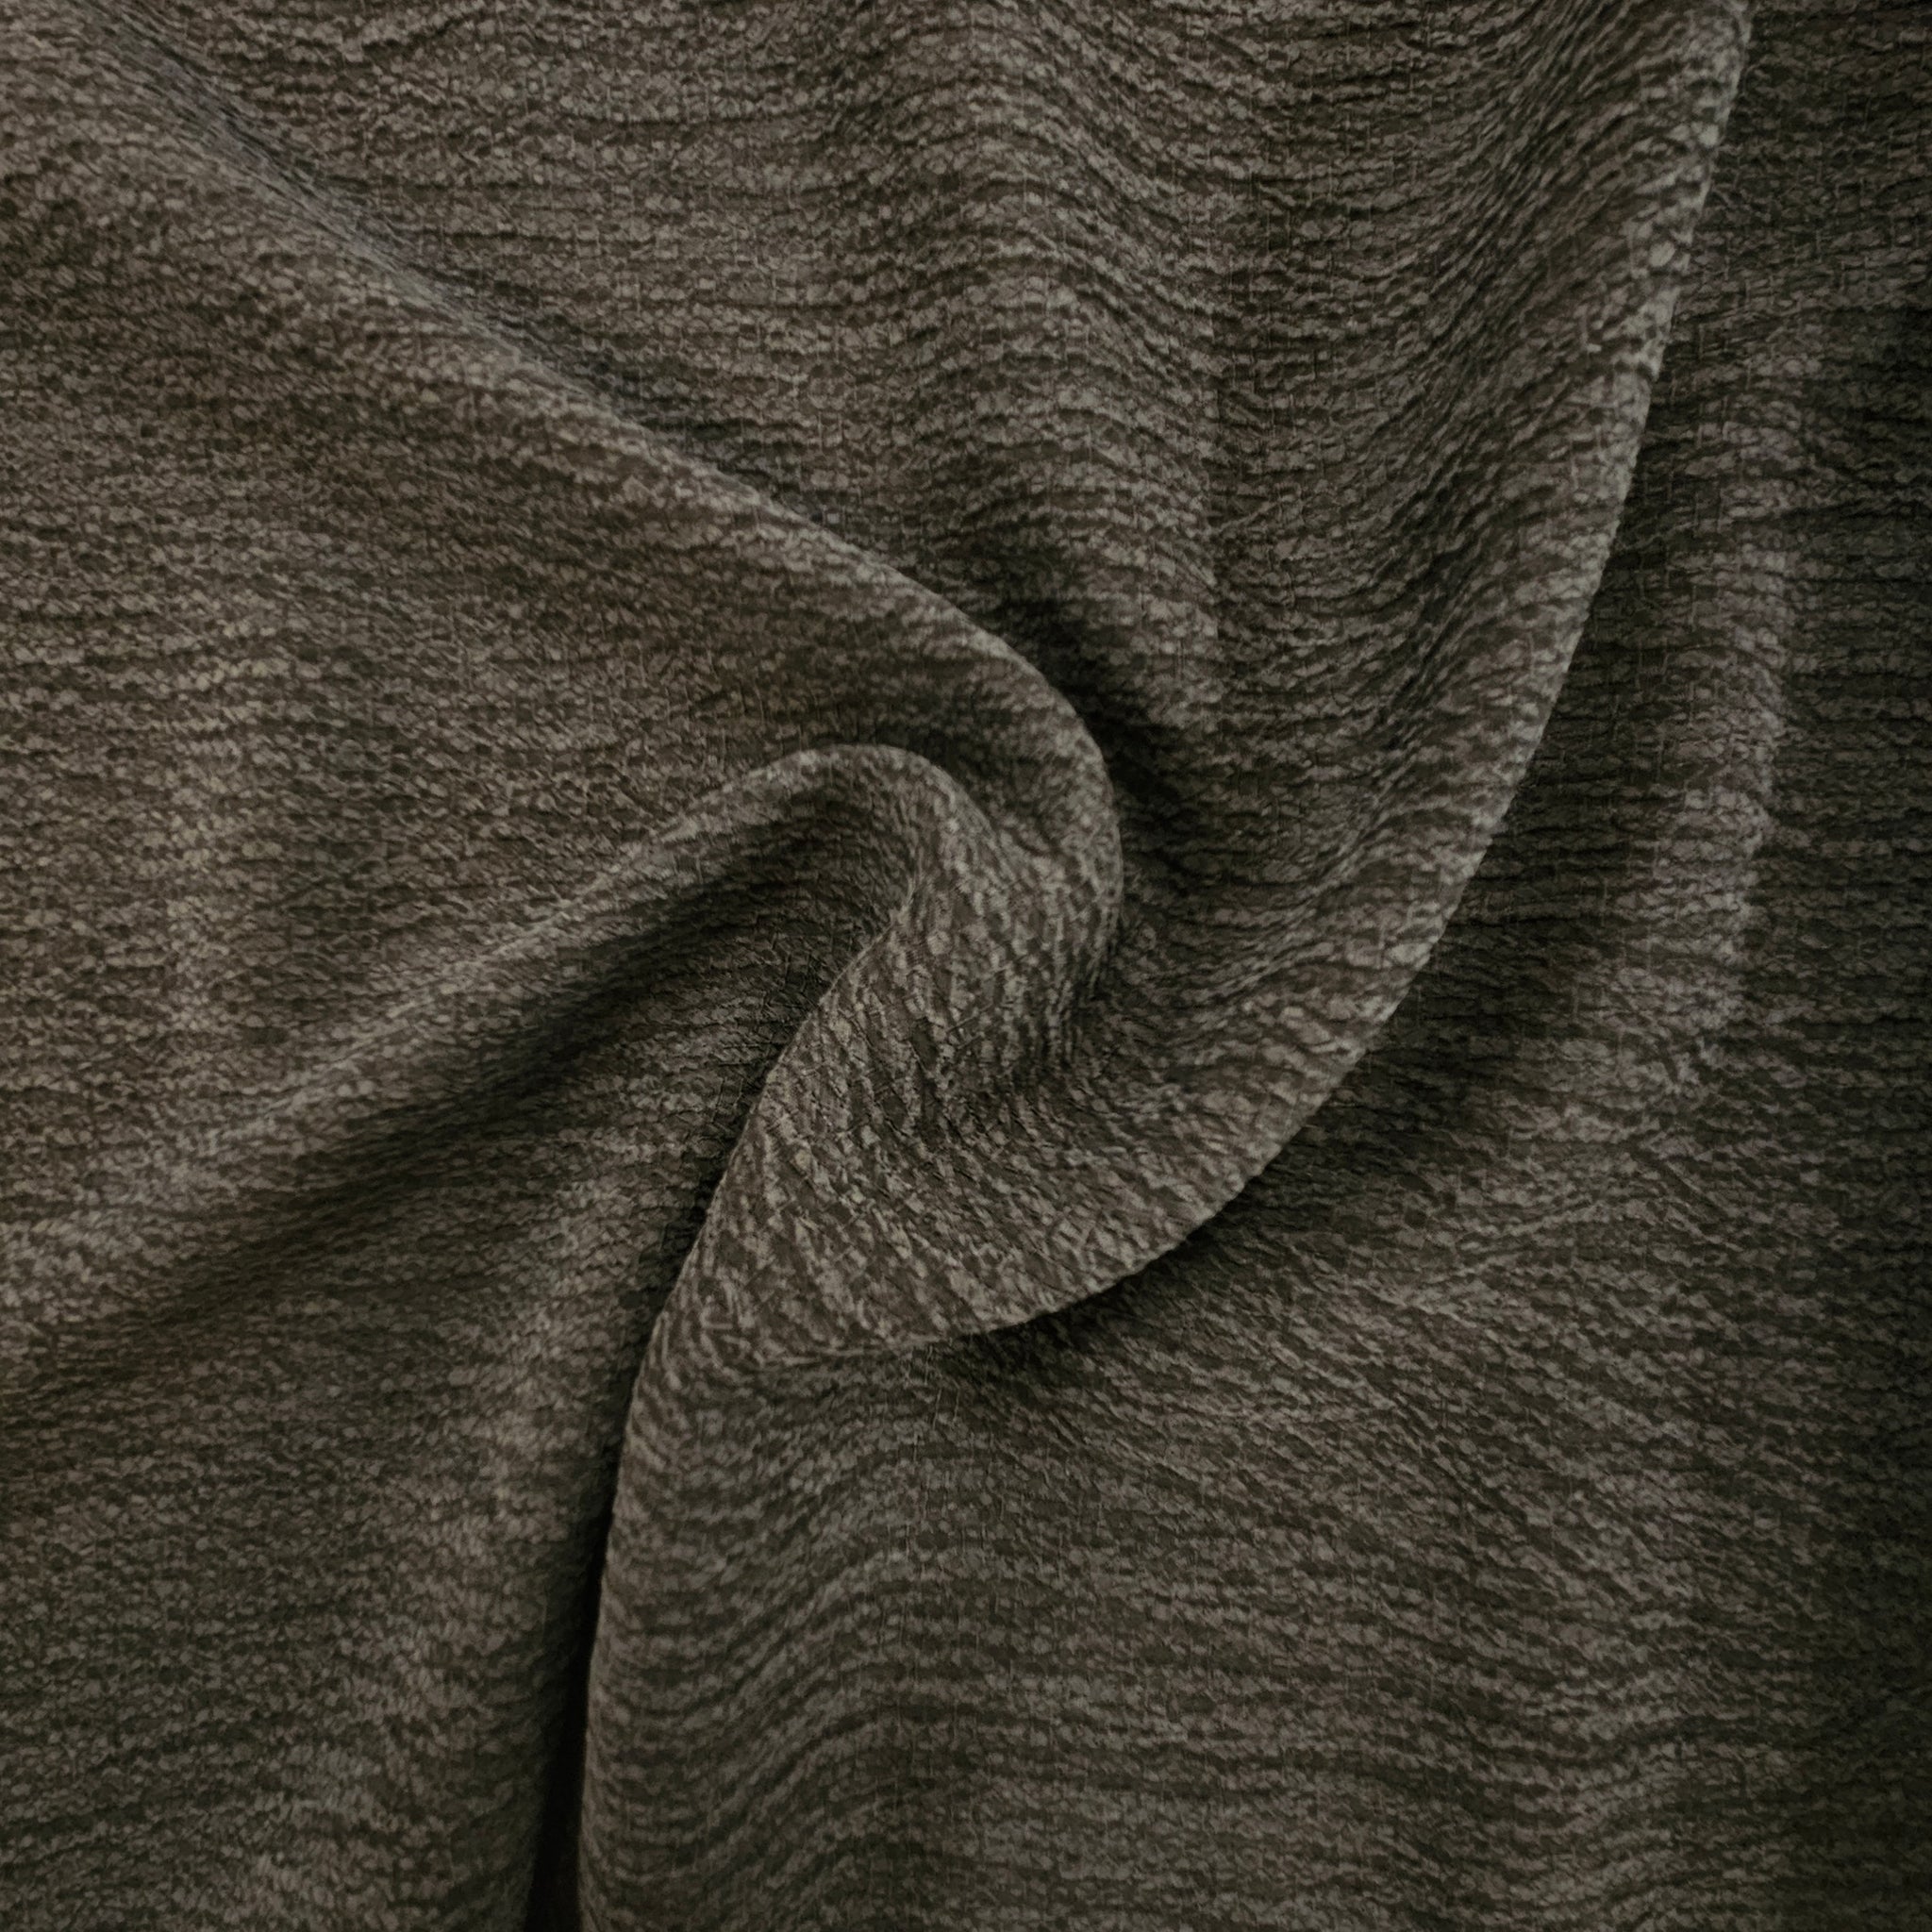 Textured Faded Rayon